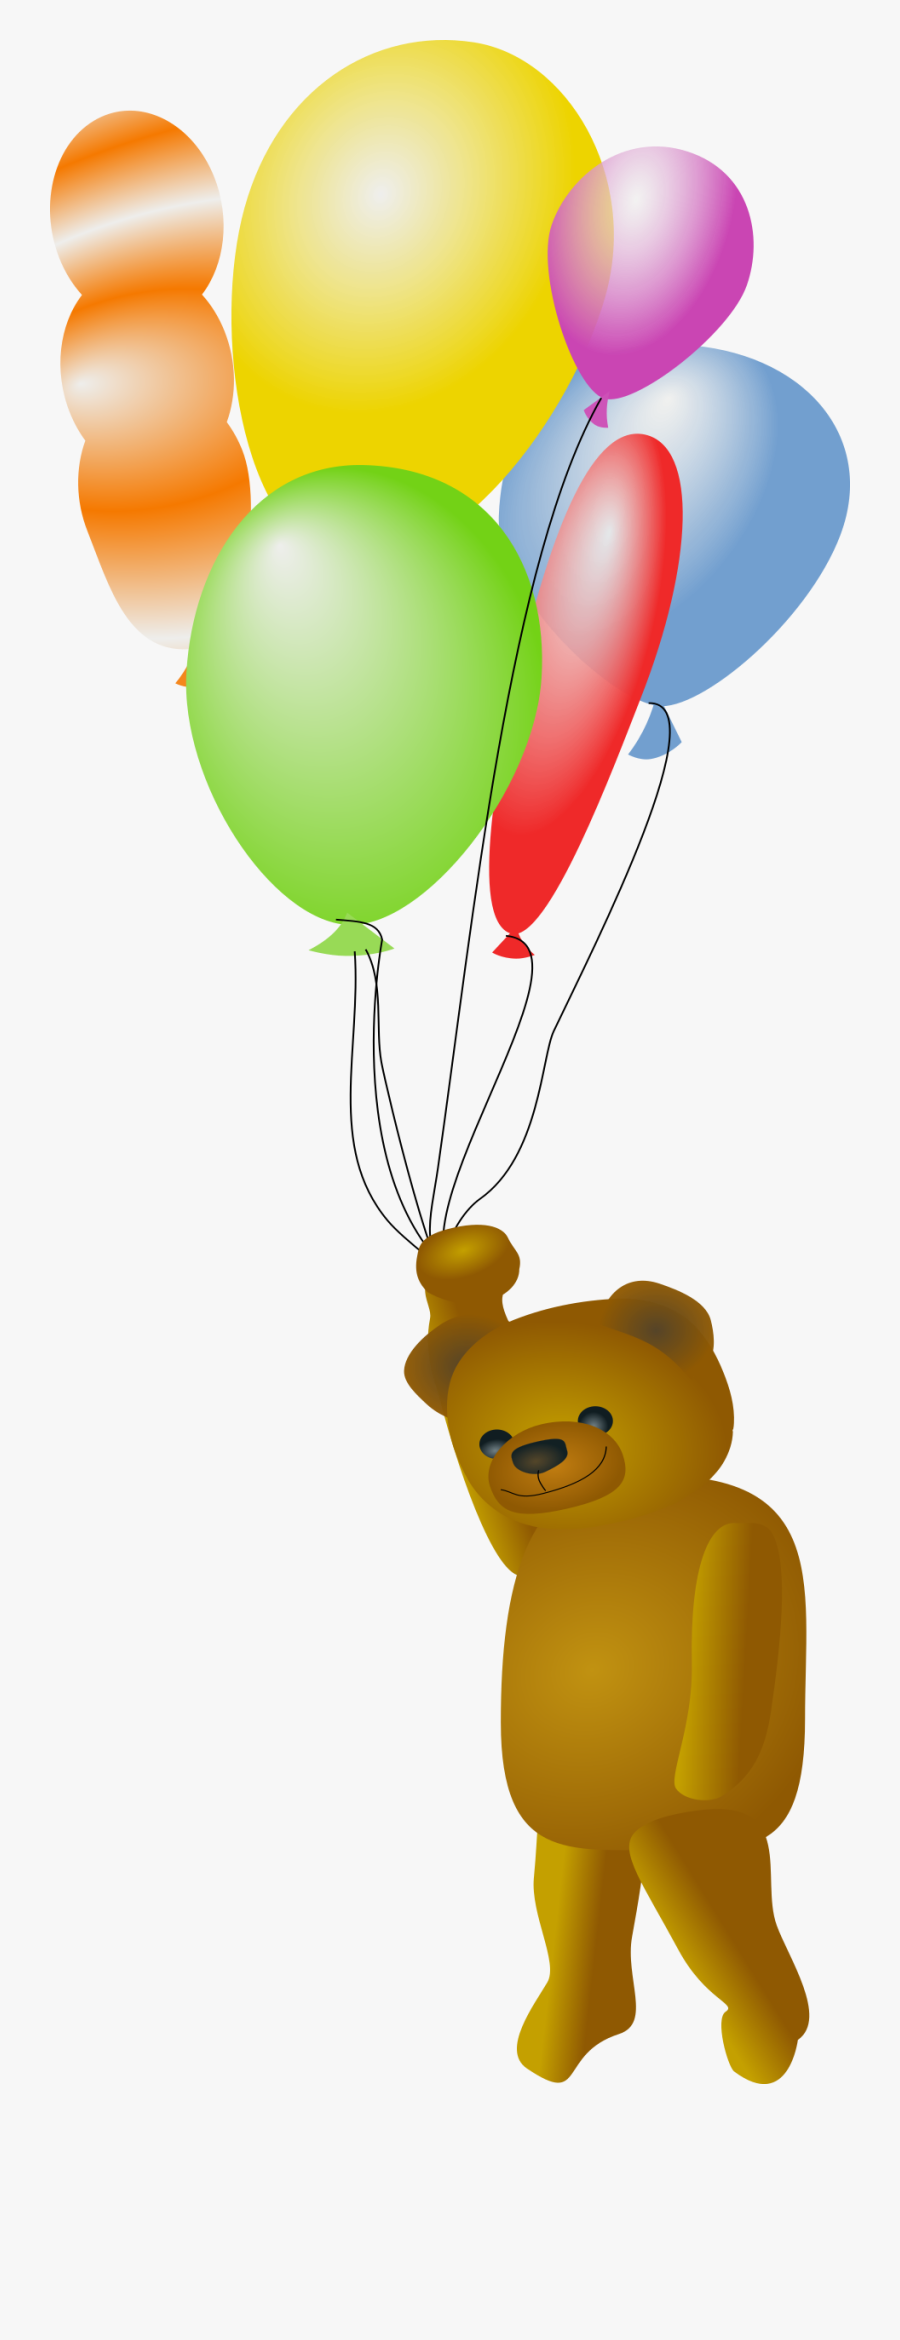 This Free Icons Png Design Of Teddy Bear With Balloons - Balloon Png Teddy Bear, Transparent Clipart